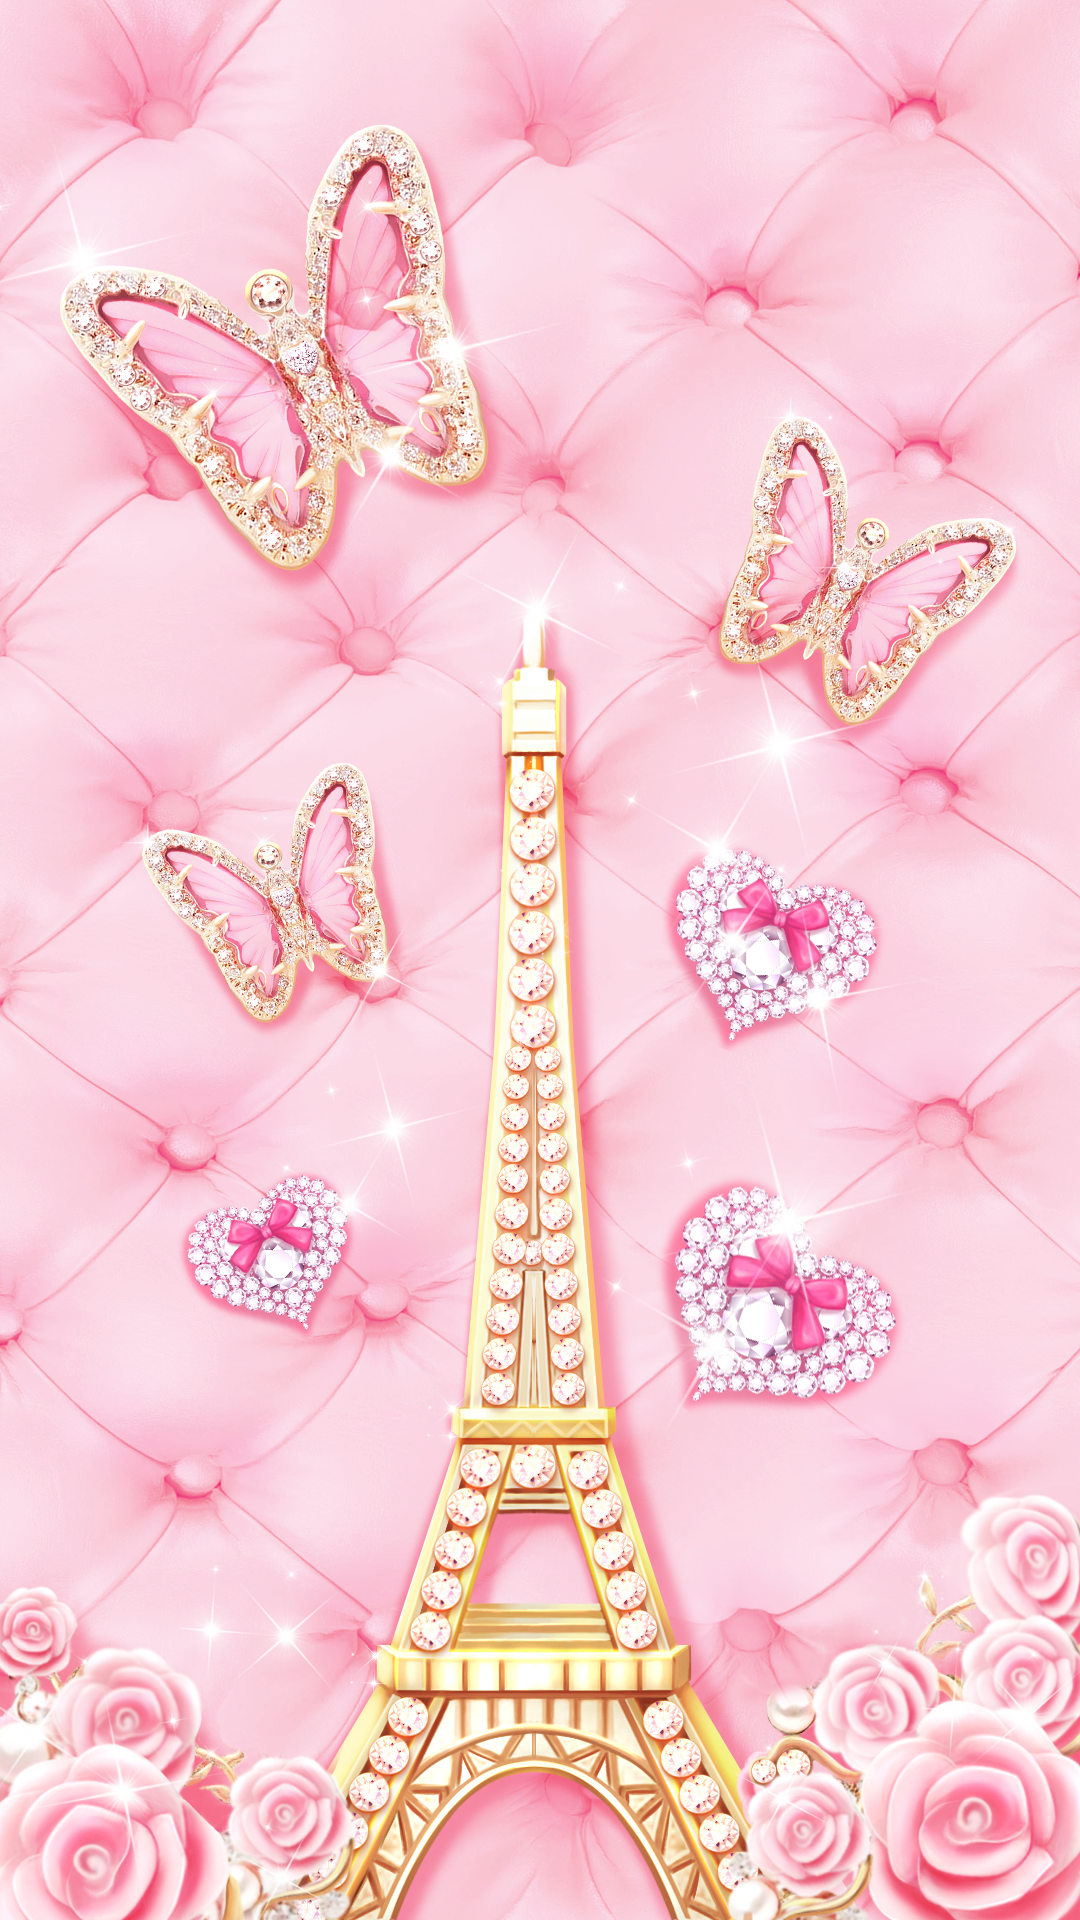 Pink Hearts Live Wallpaper  APK Download for Android  Aptoide